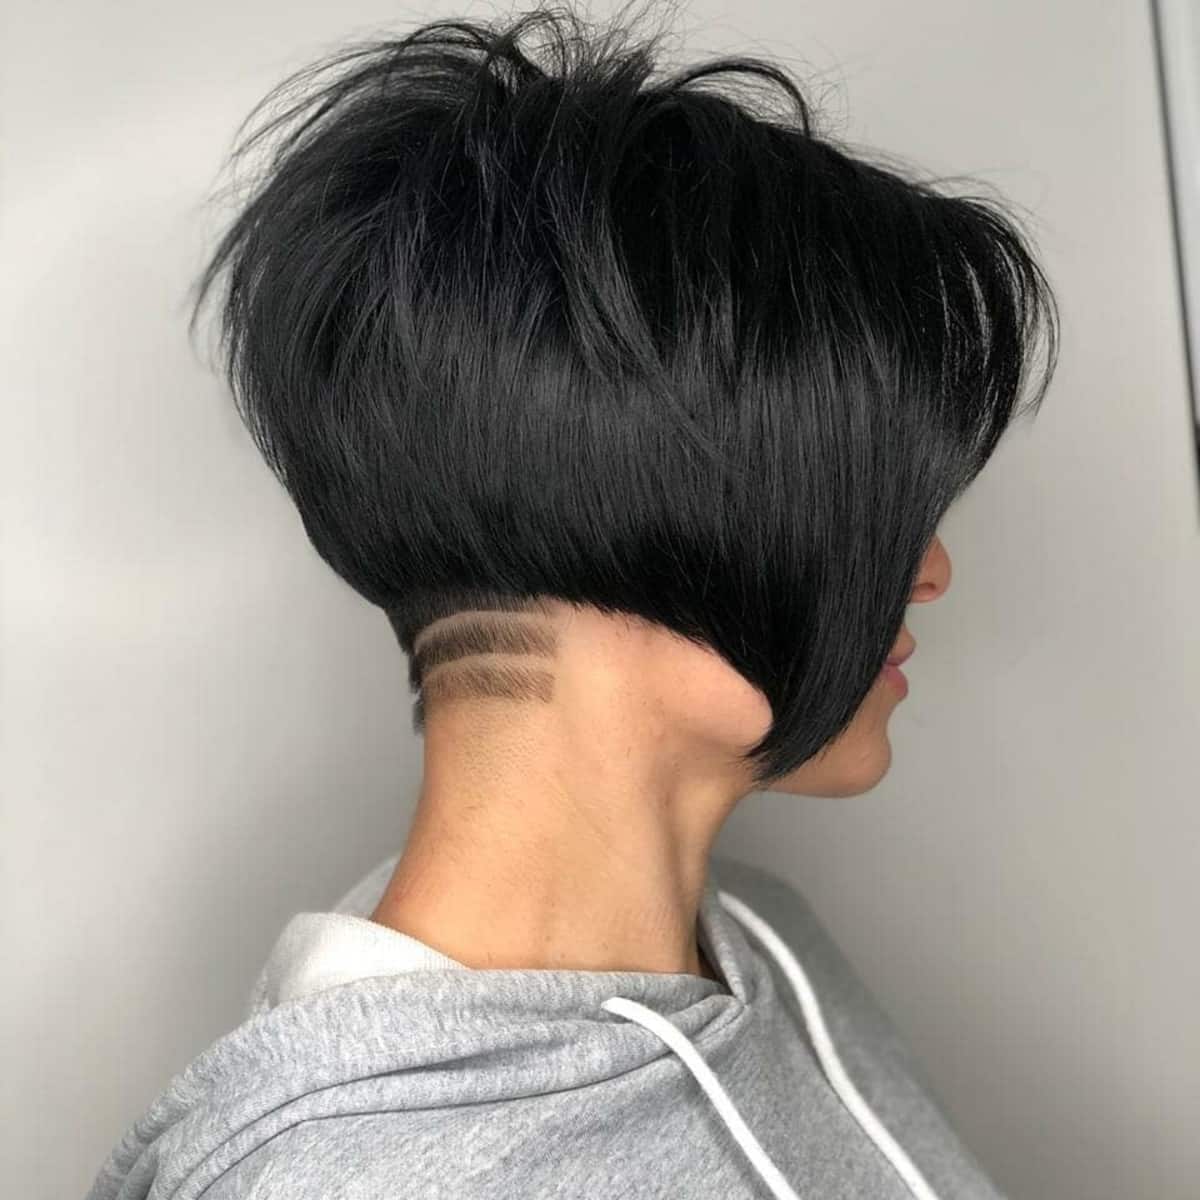 Pixie Undercut Bob with Long Bangs and a Shaved Line Design